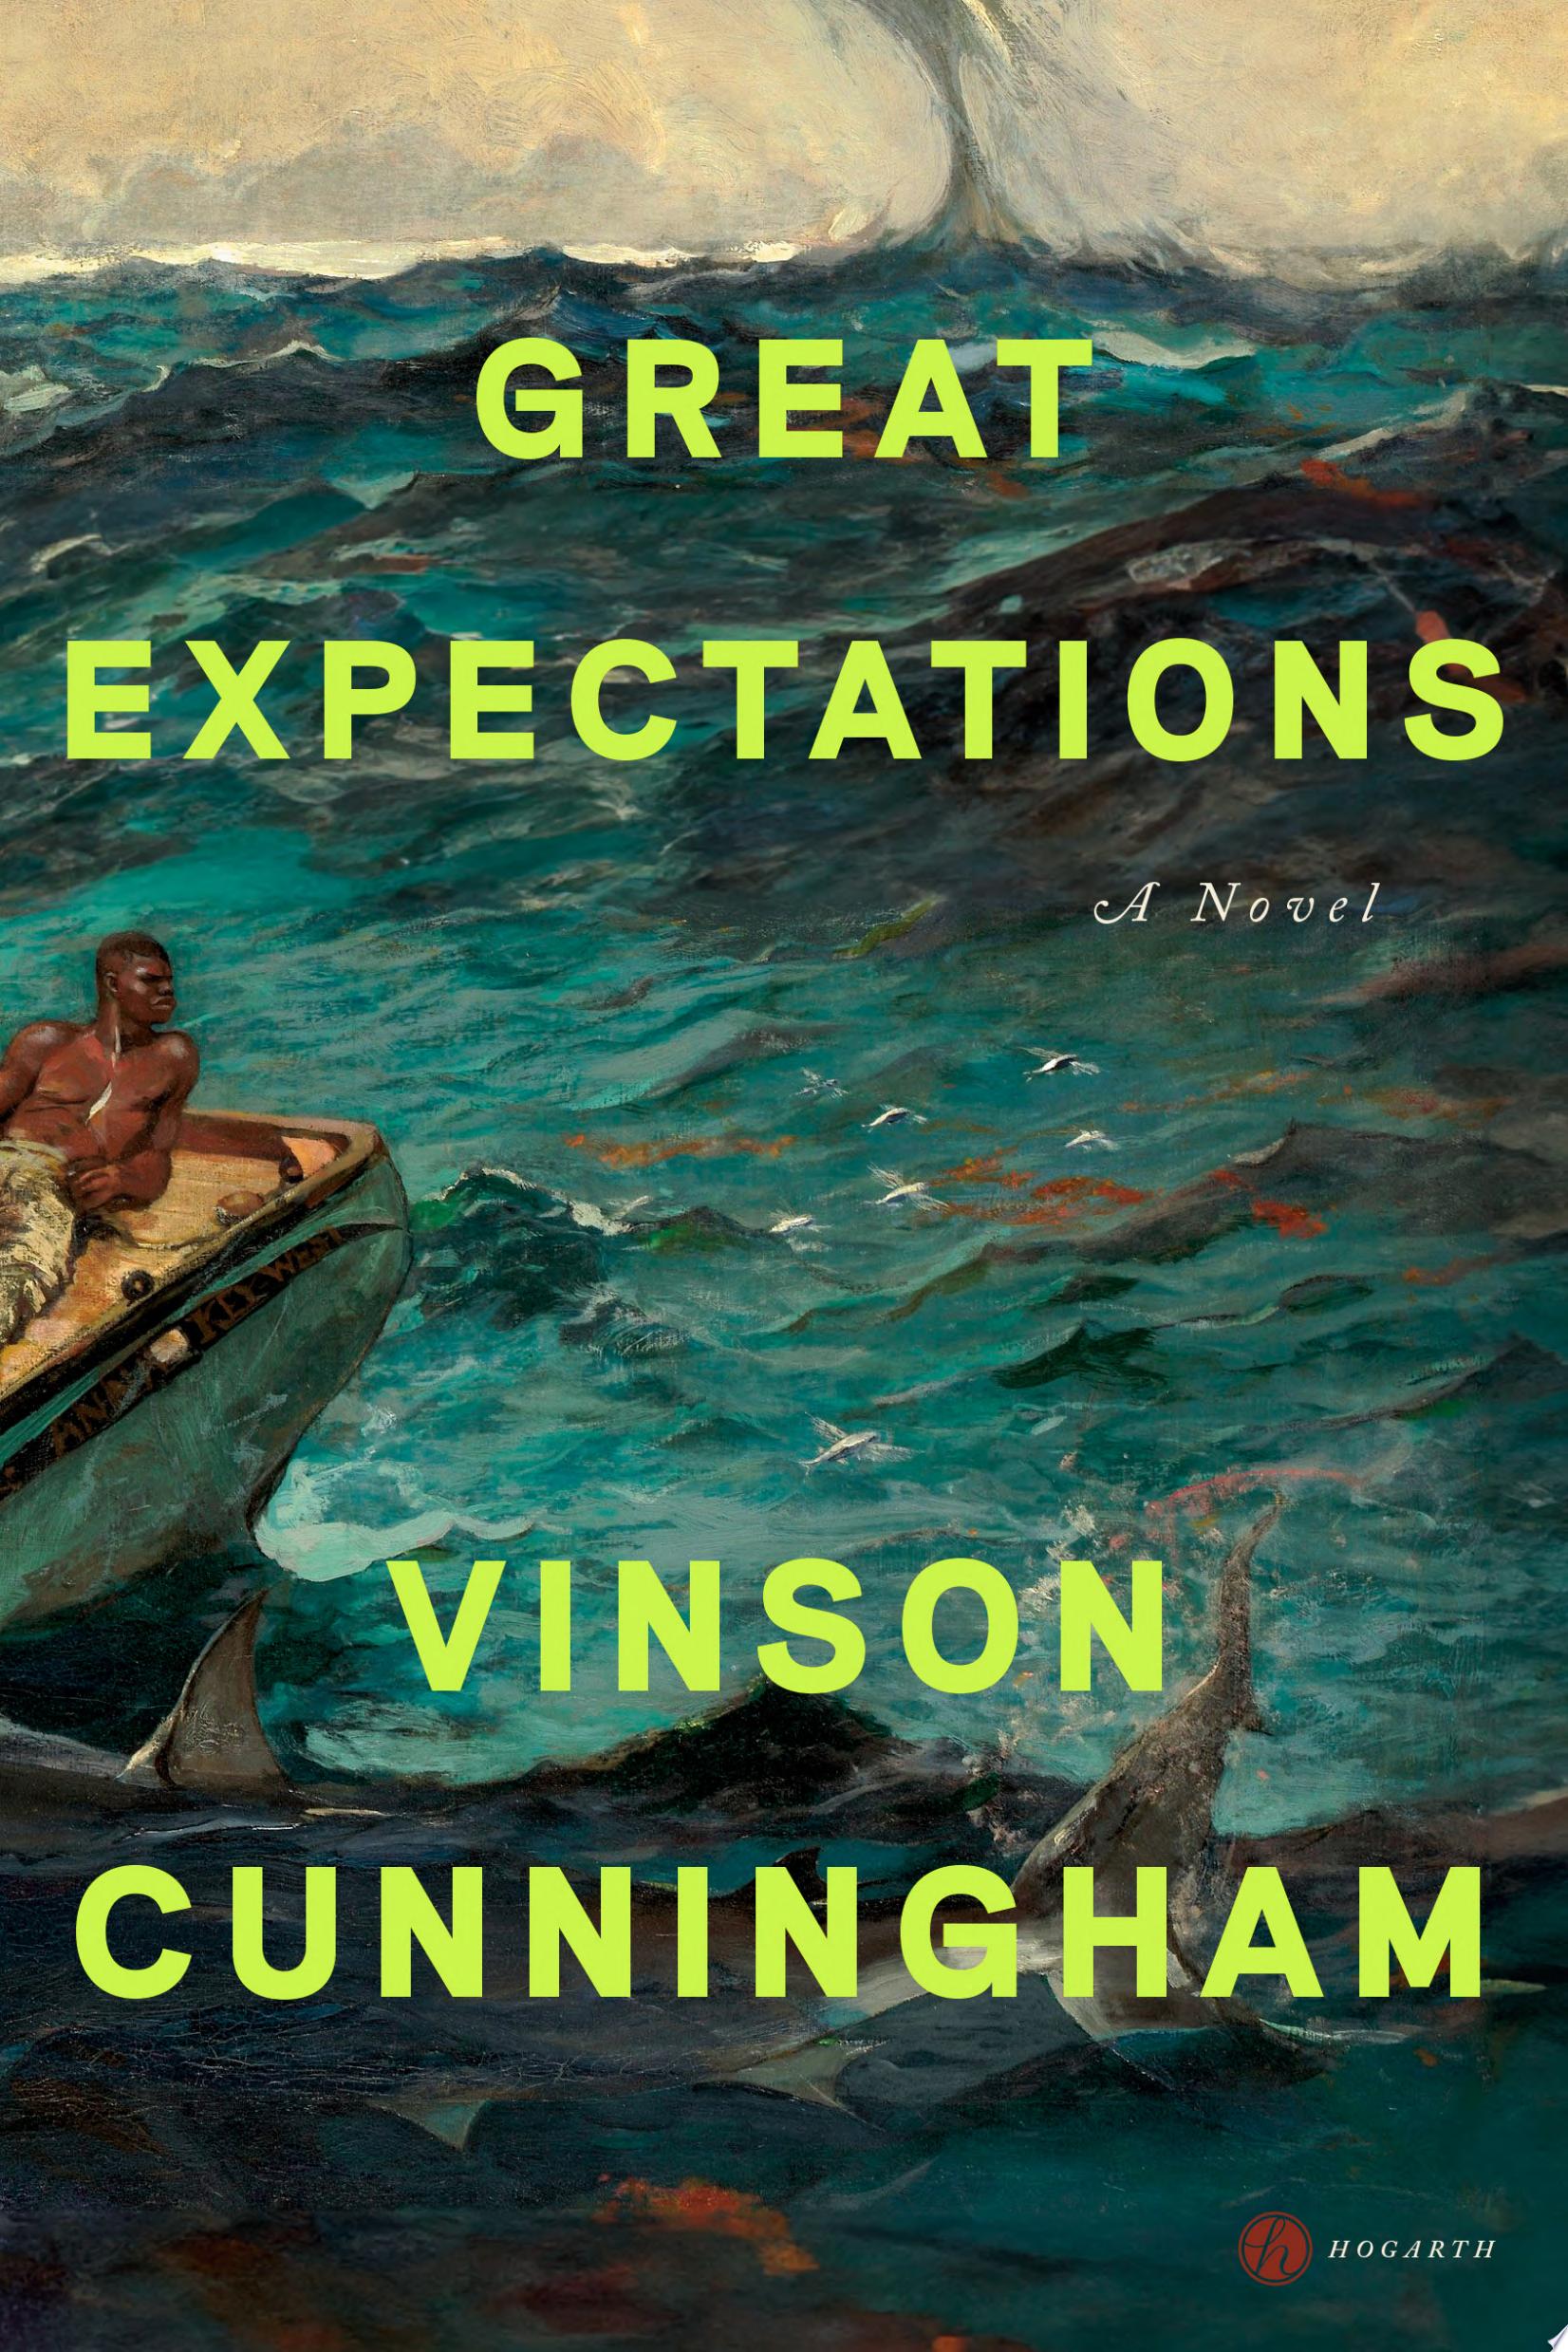 Image for "Great Expectations"